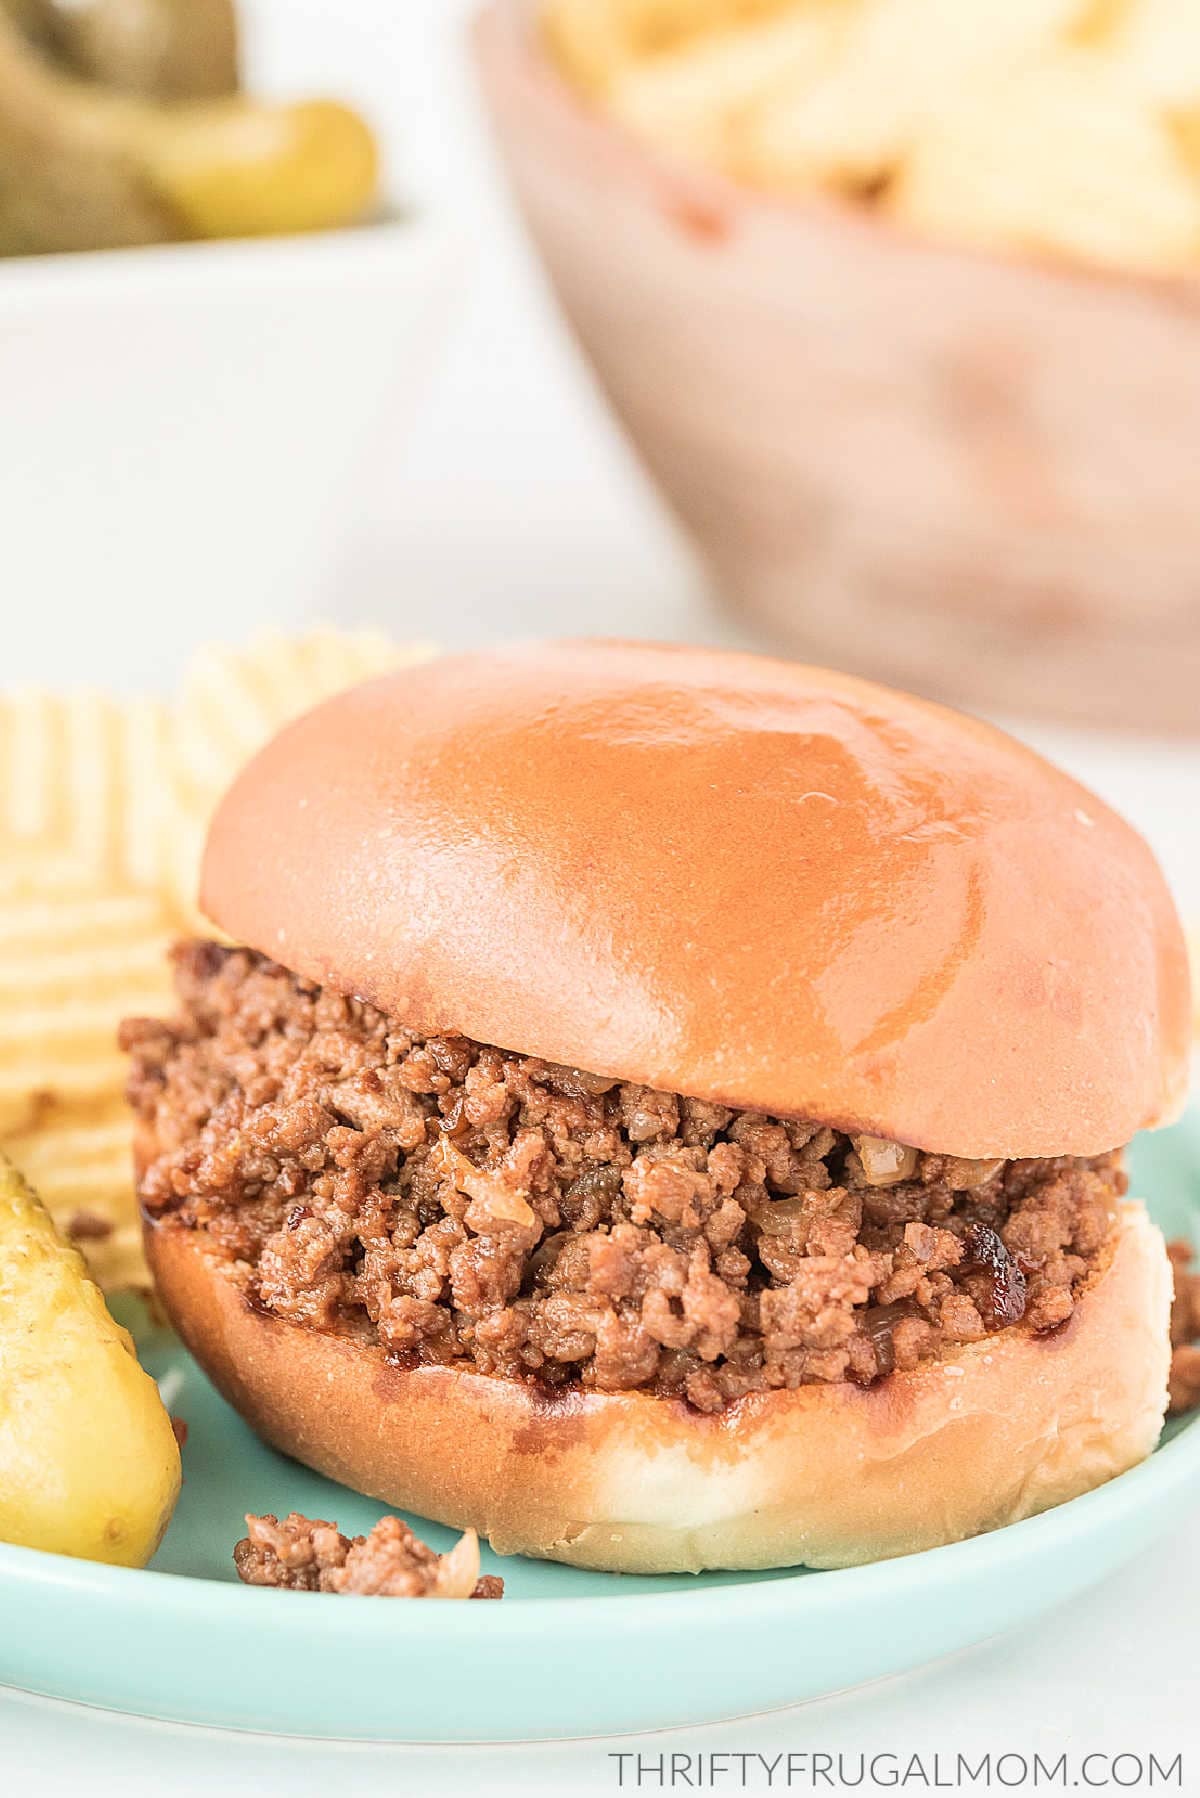 a sloppy joe sandwich on a plate with chips and pickle.